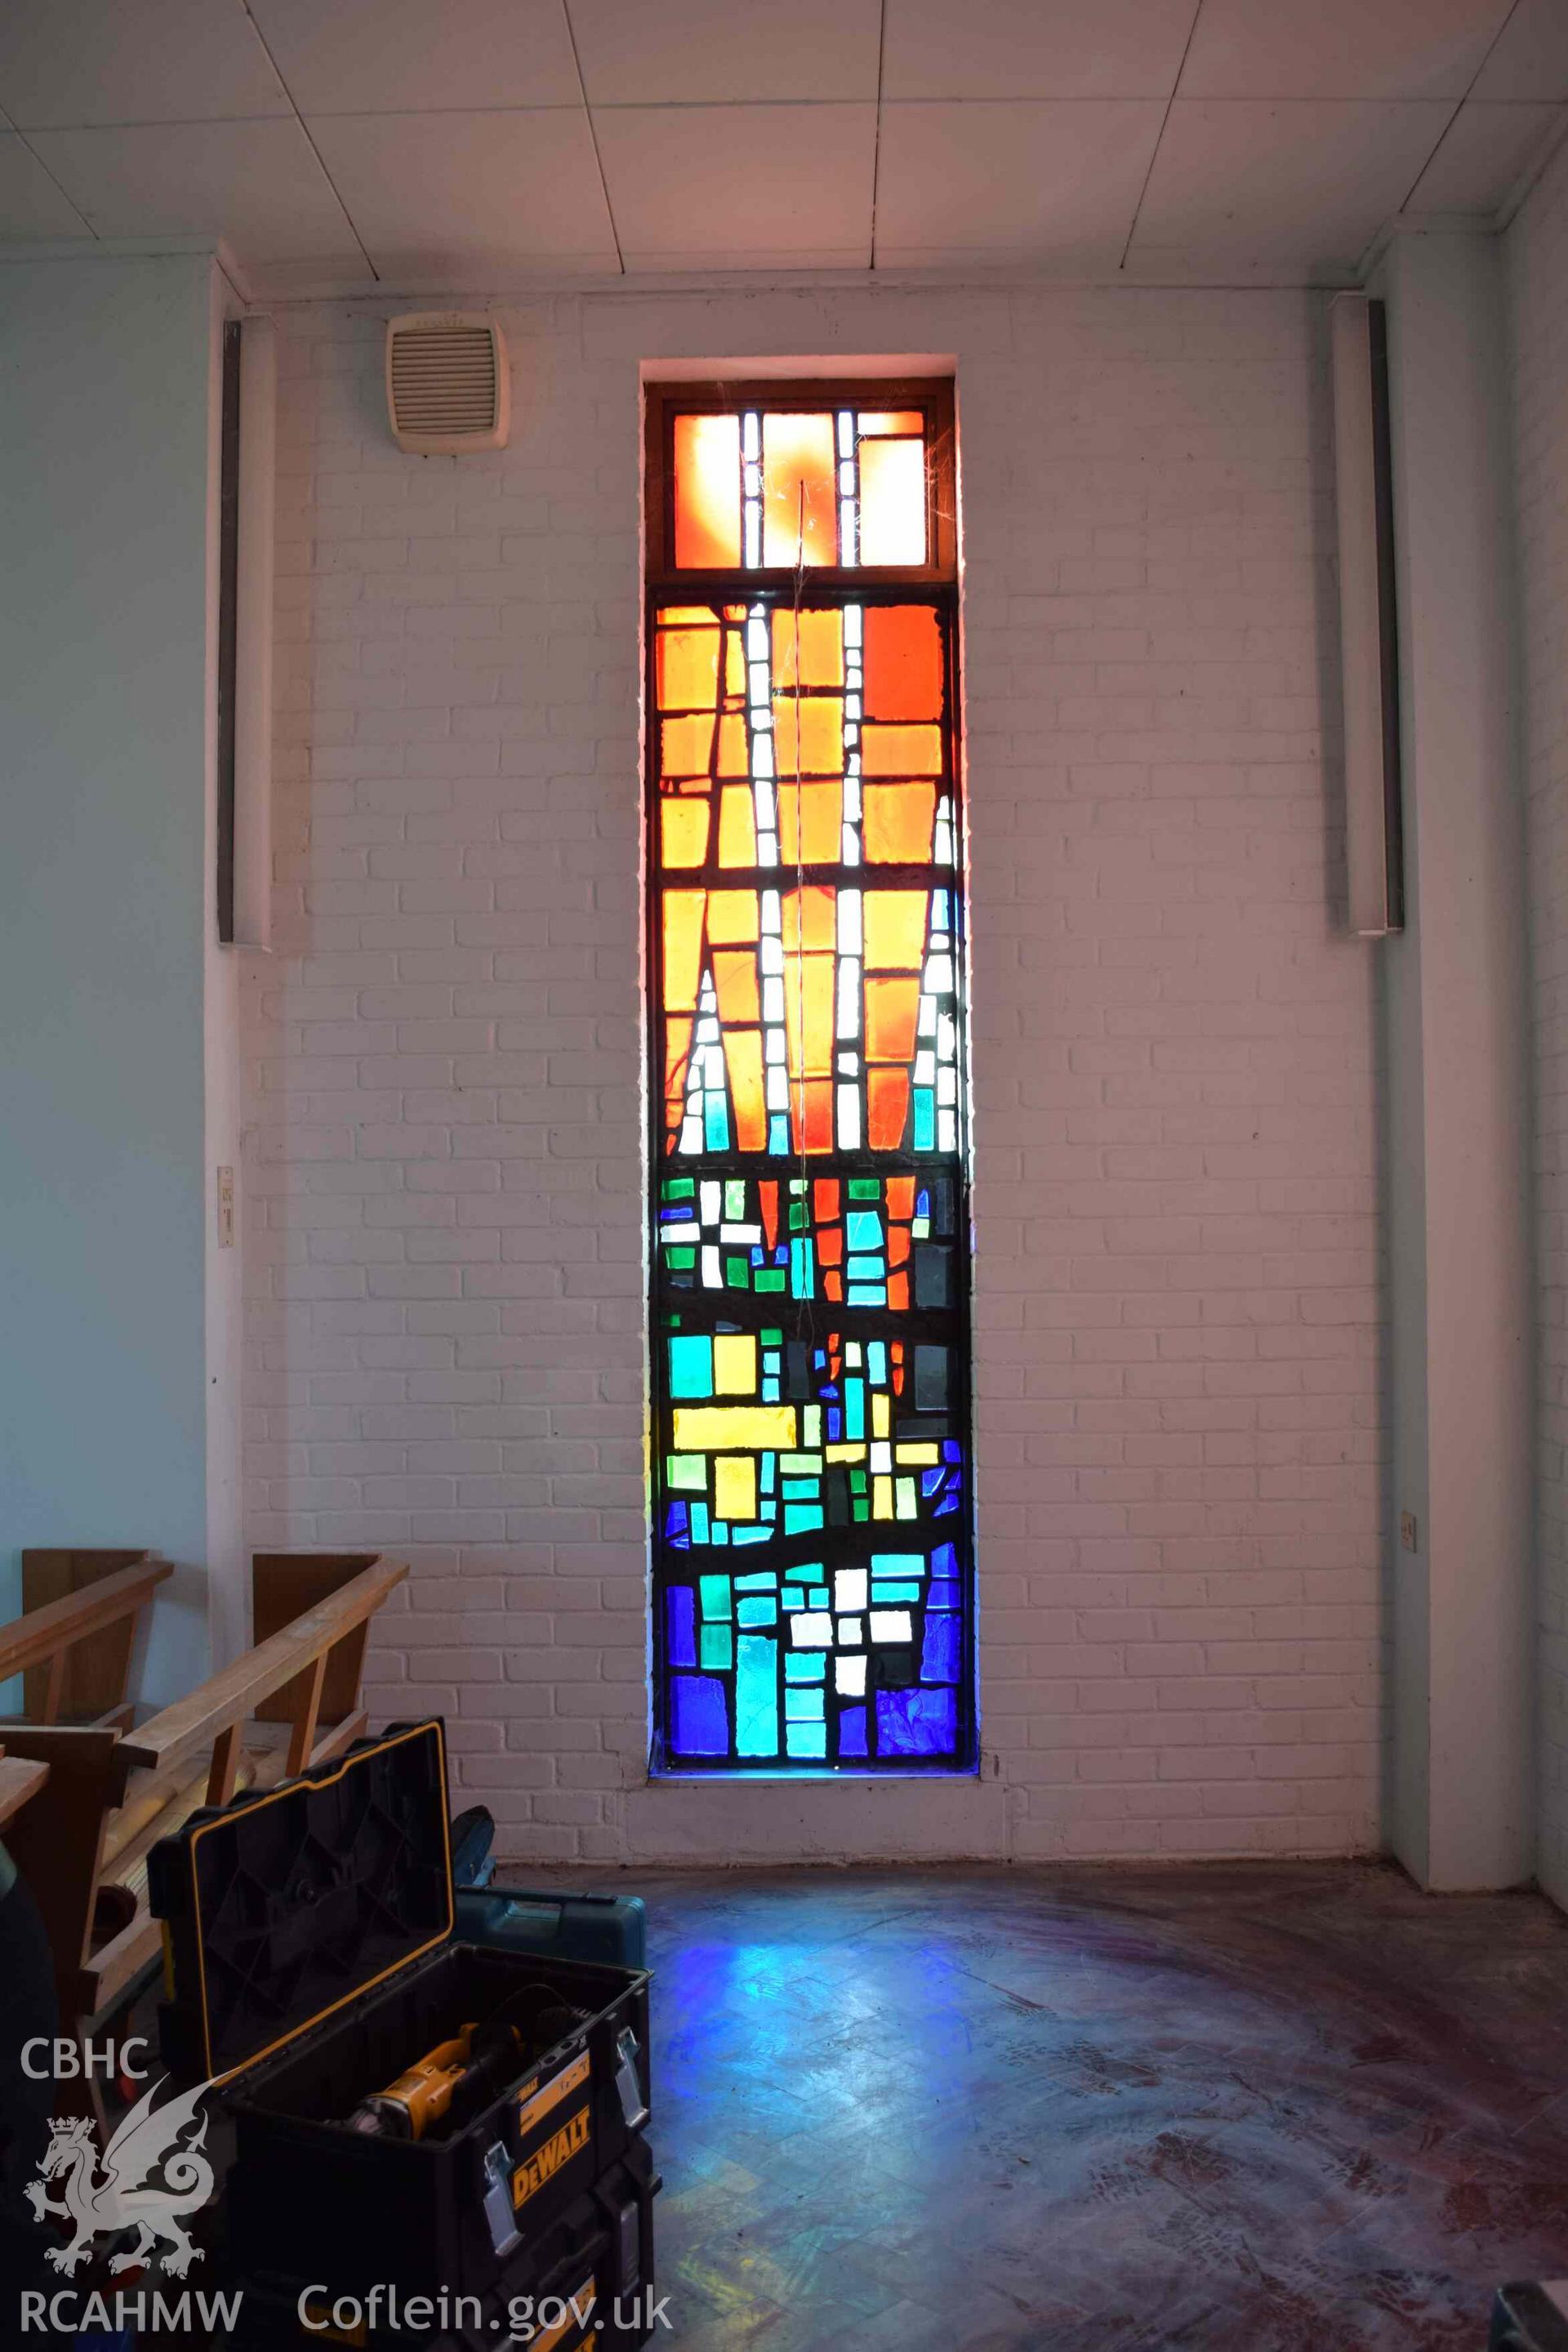 Photograph showing a Jonah Jones Dalle de Verre window (11b), at the church of The Resurrection of Our Saviour, Morfa Nefyn, taken on behalf of the Architectural Glass Centre during the removal of the windows in March 2019.